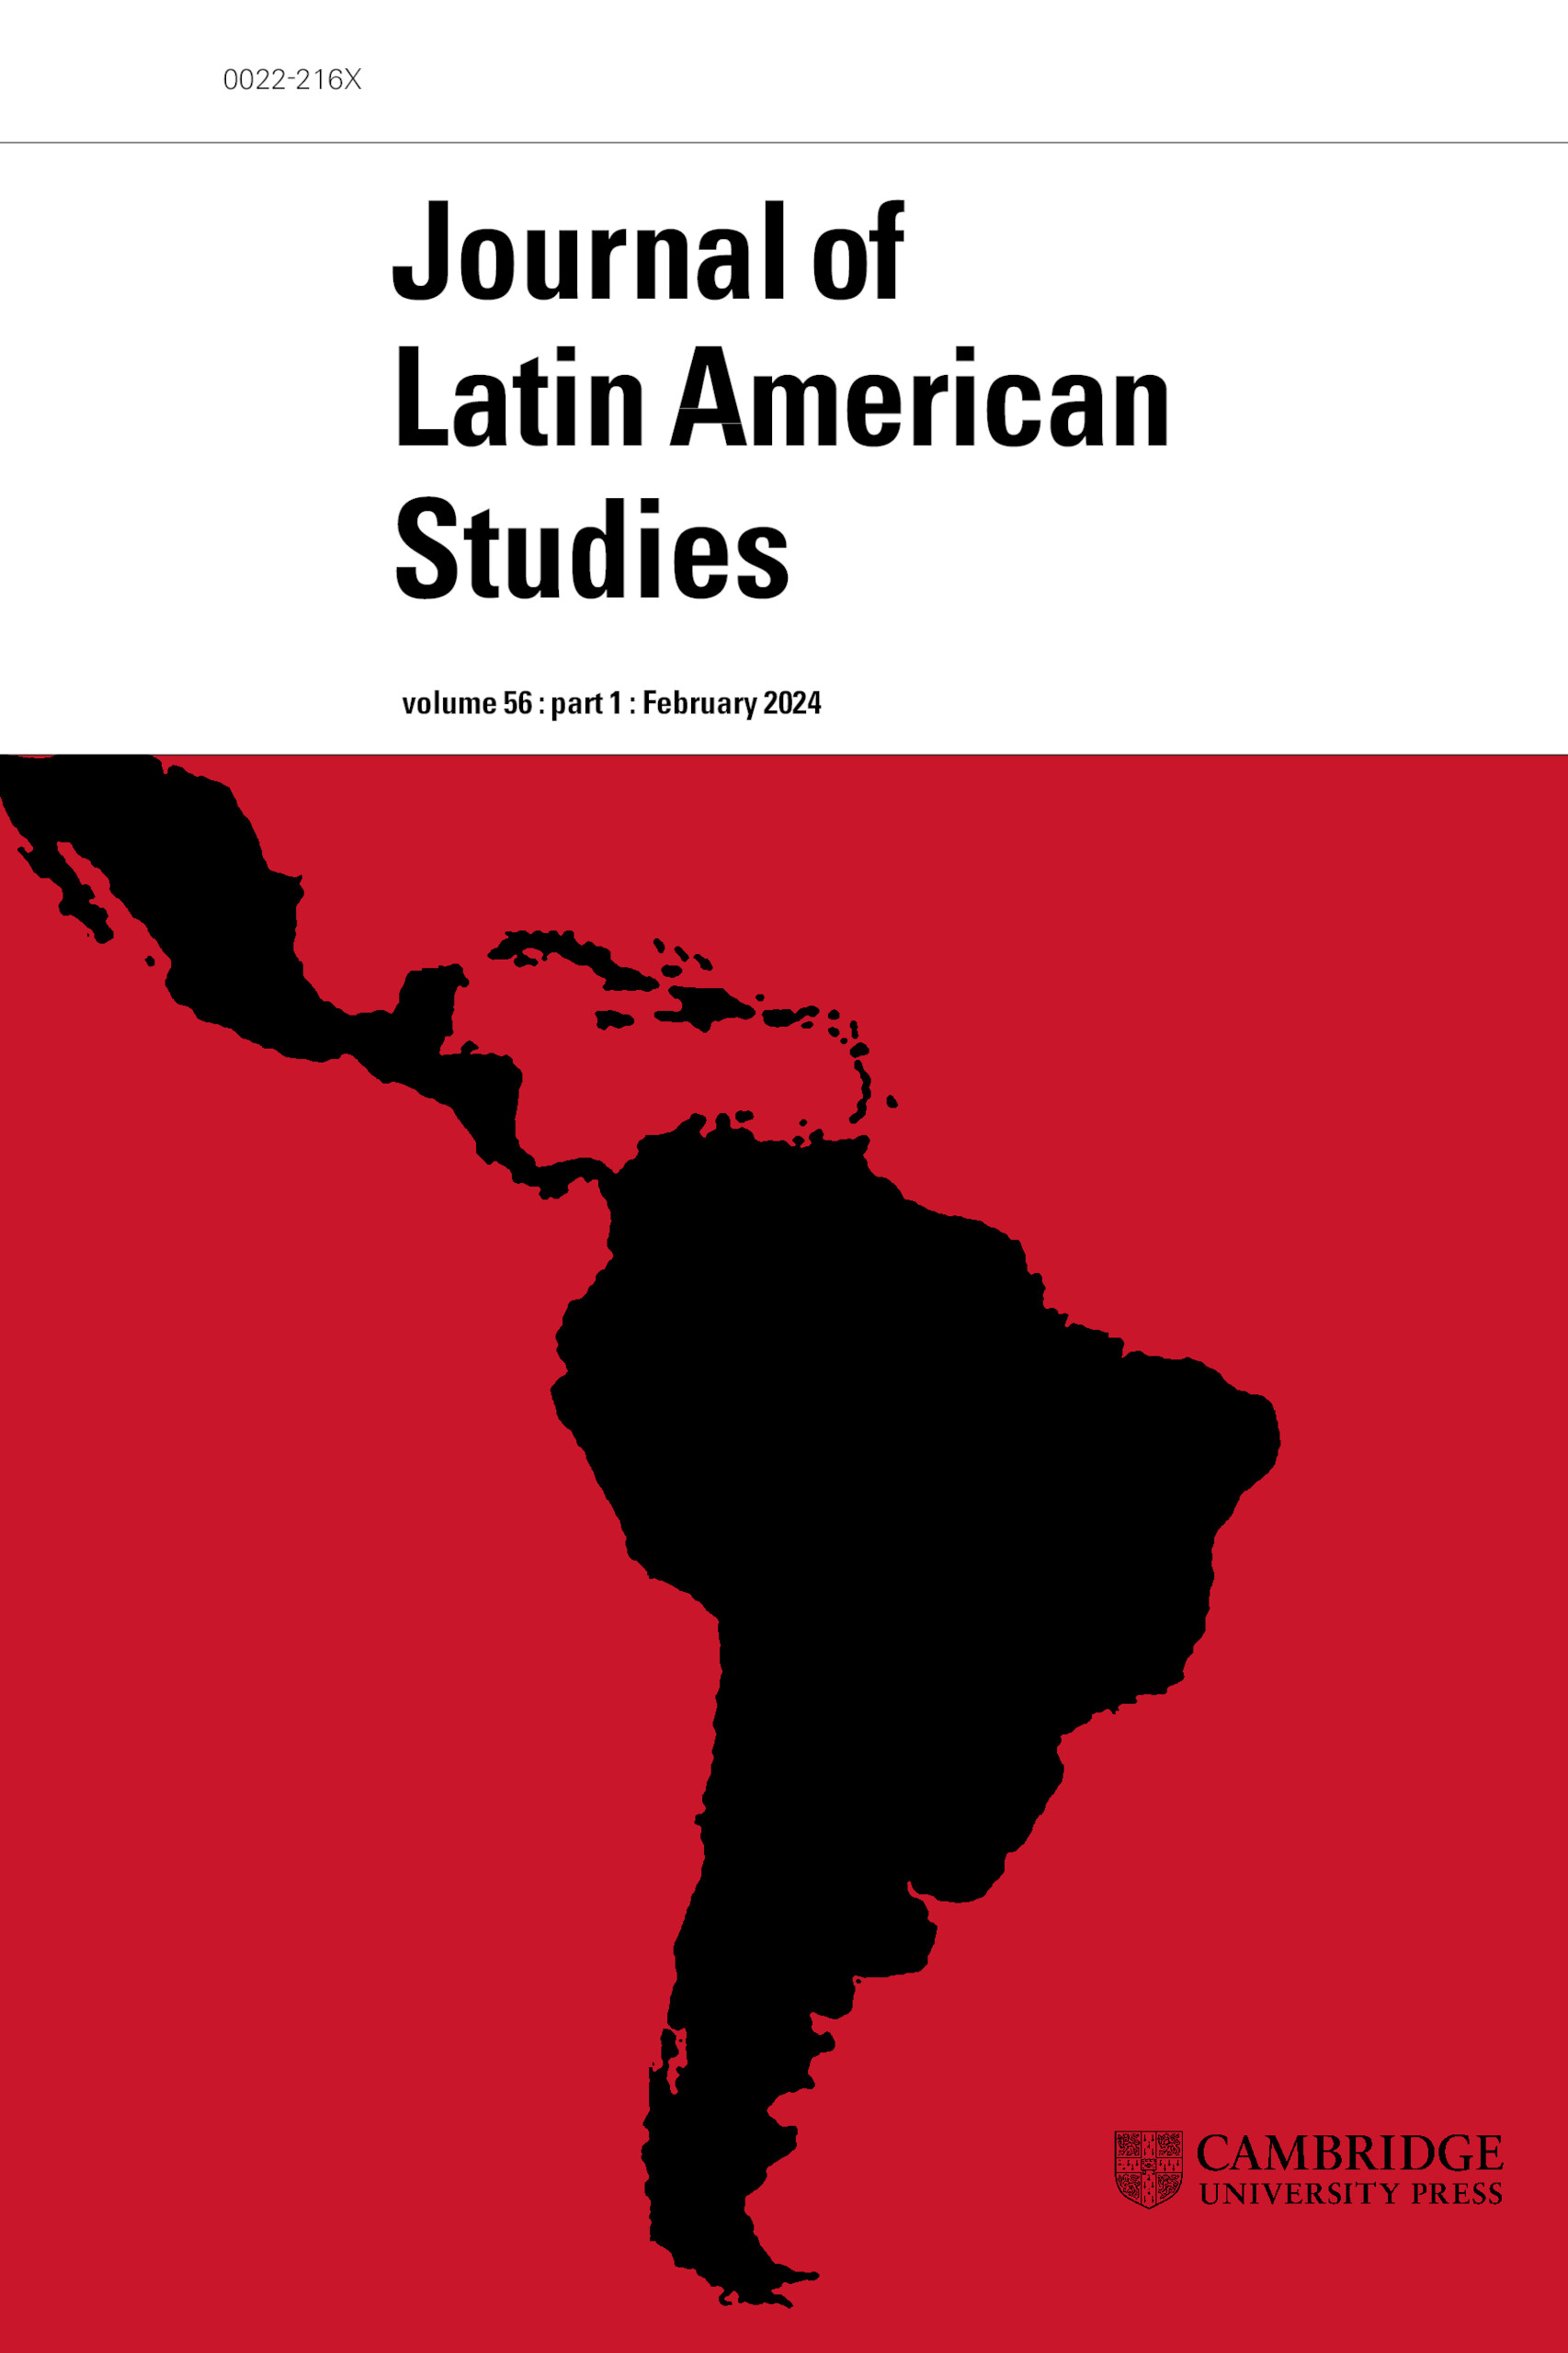 Cover of the Journal of Latin American Studies